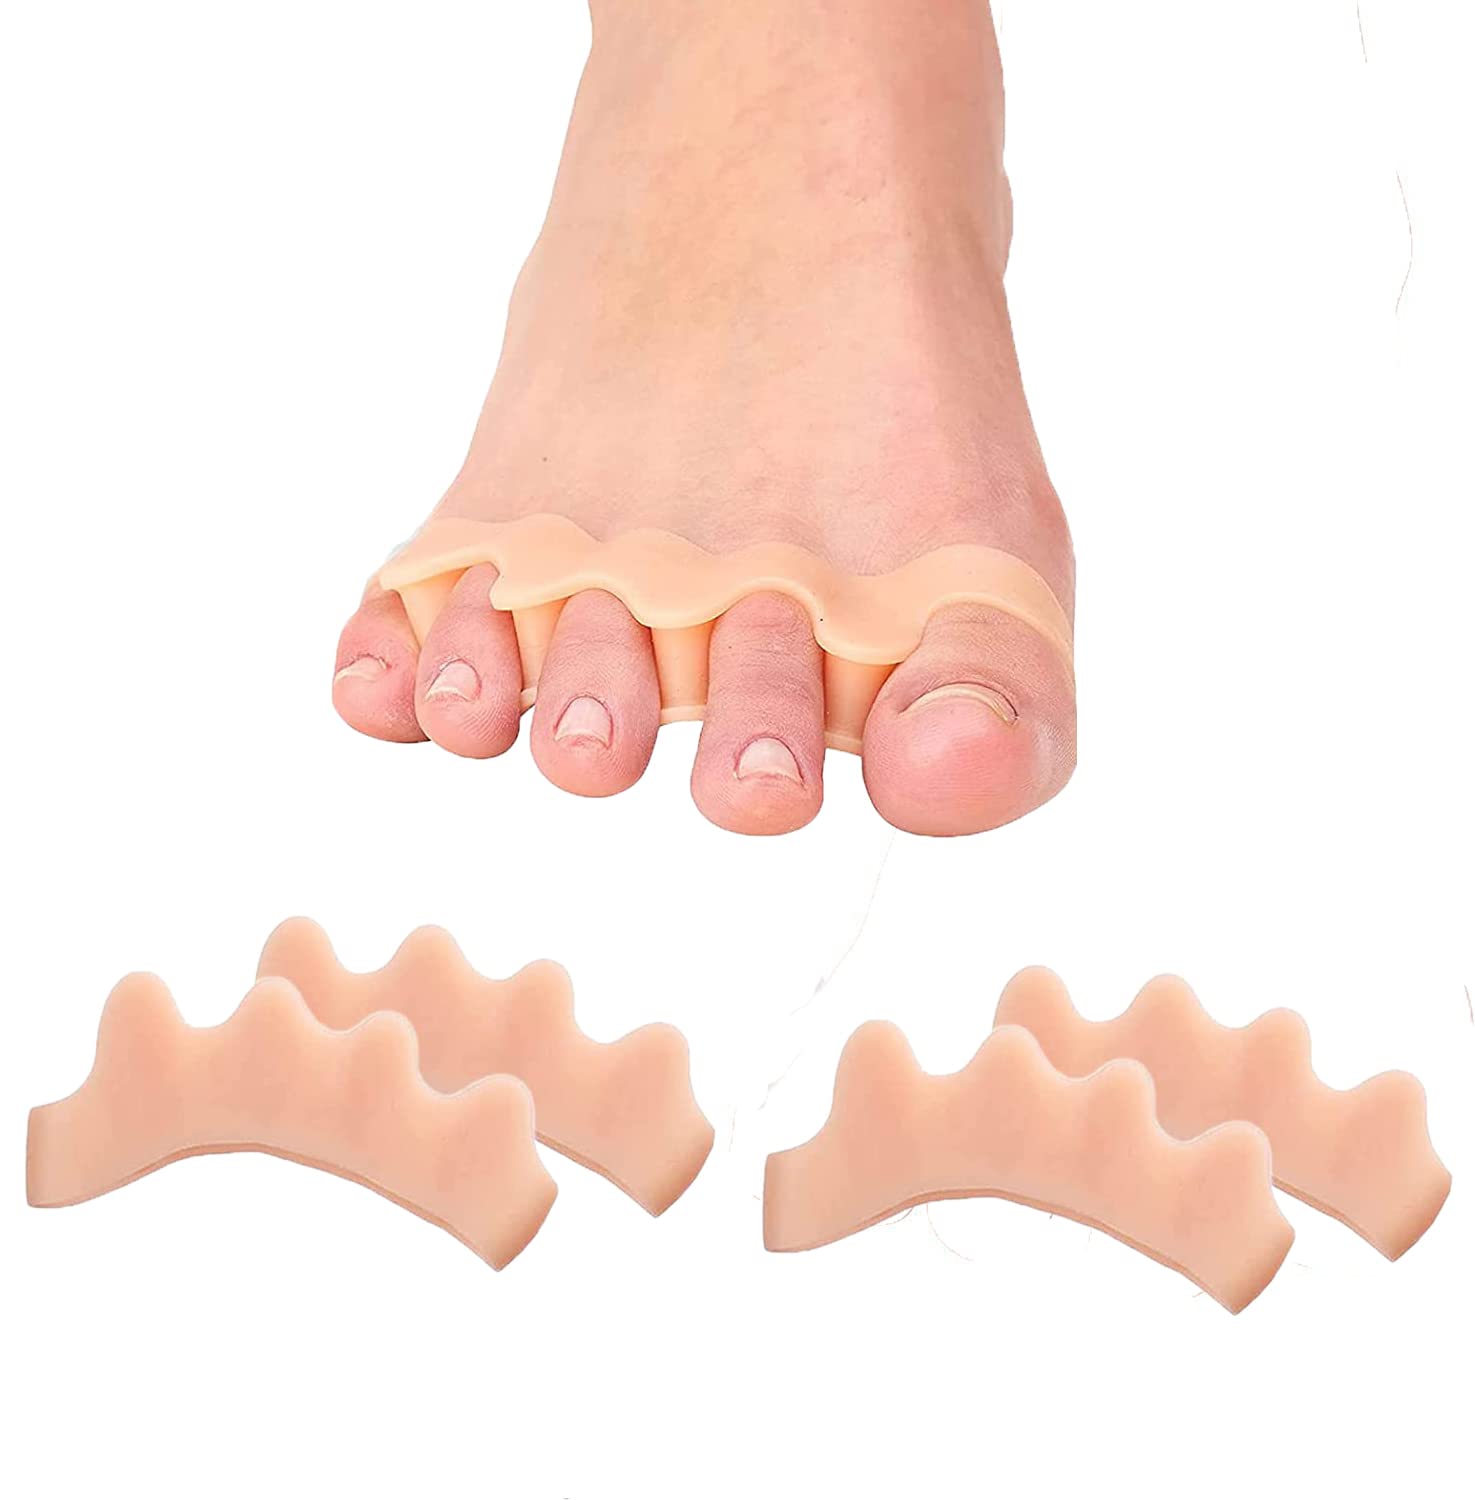 Yoga Toes v4 - Yoga For All